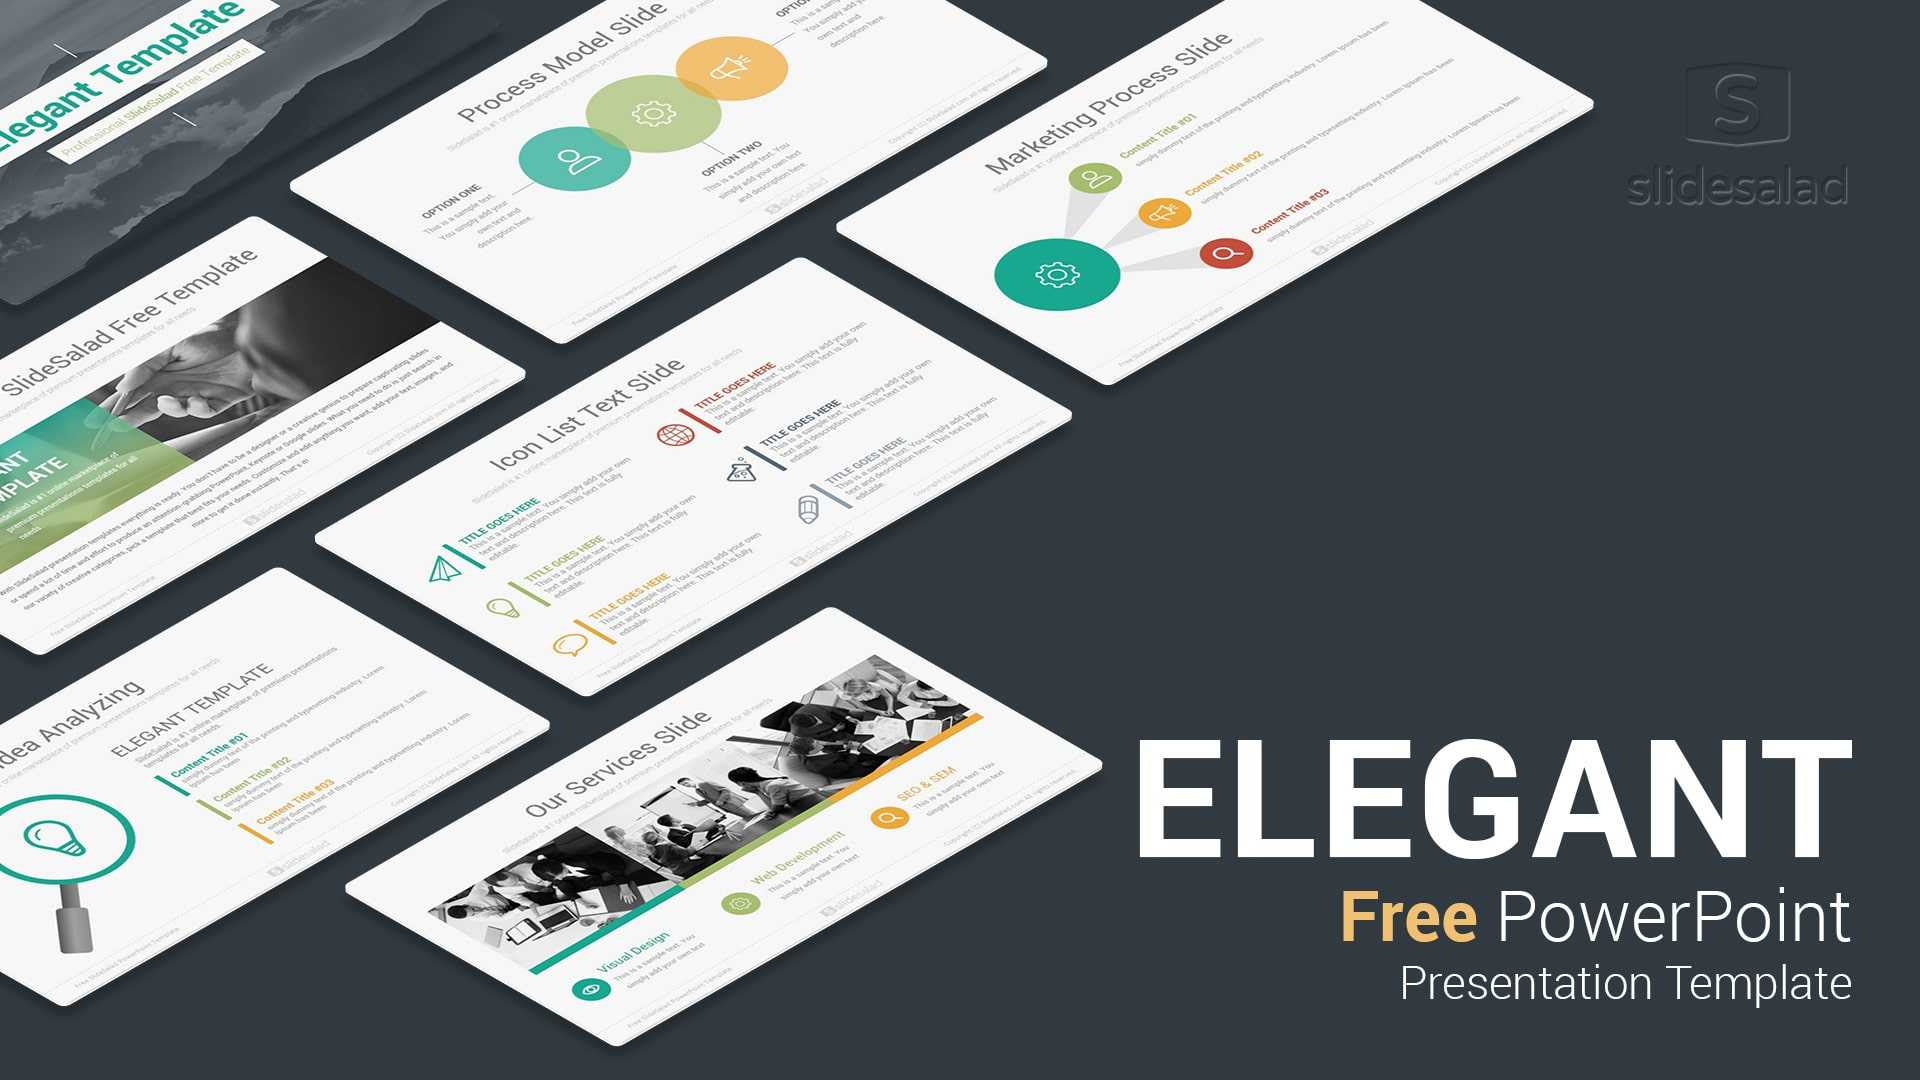 Elegant Free Download Powerpoint Templates For Presentation With Powerpoint Slides Design Templates For Free